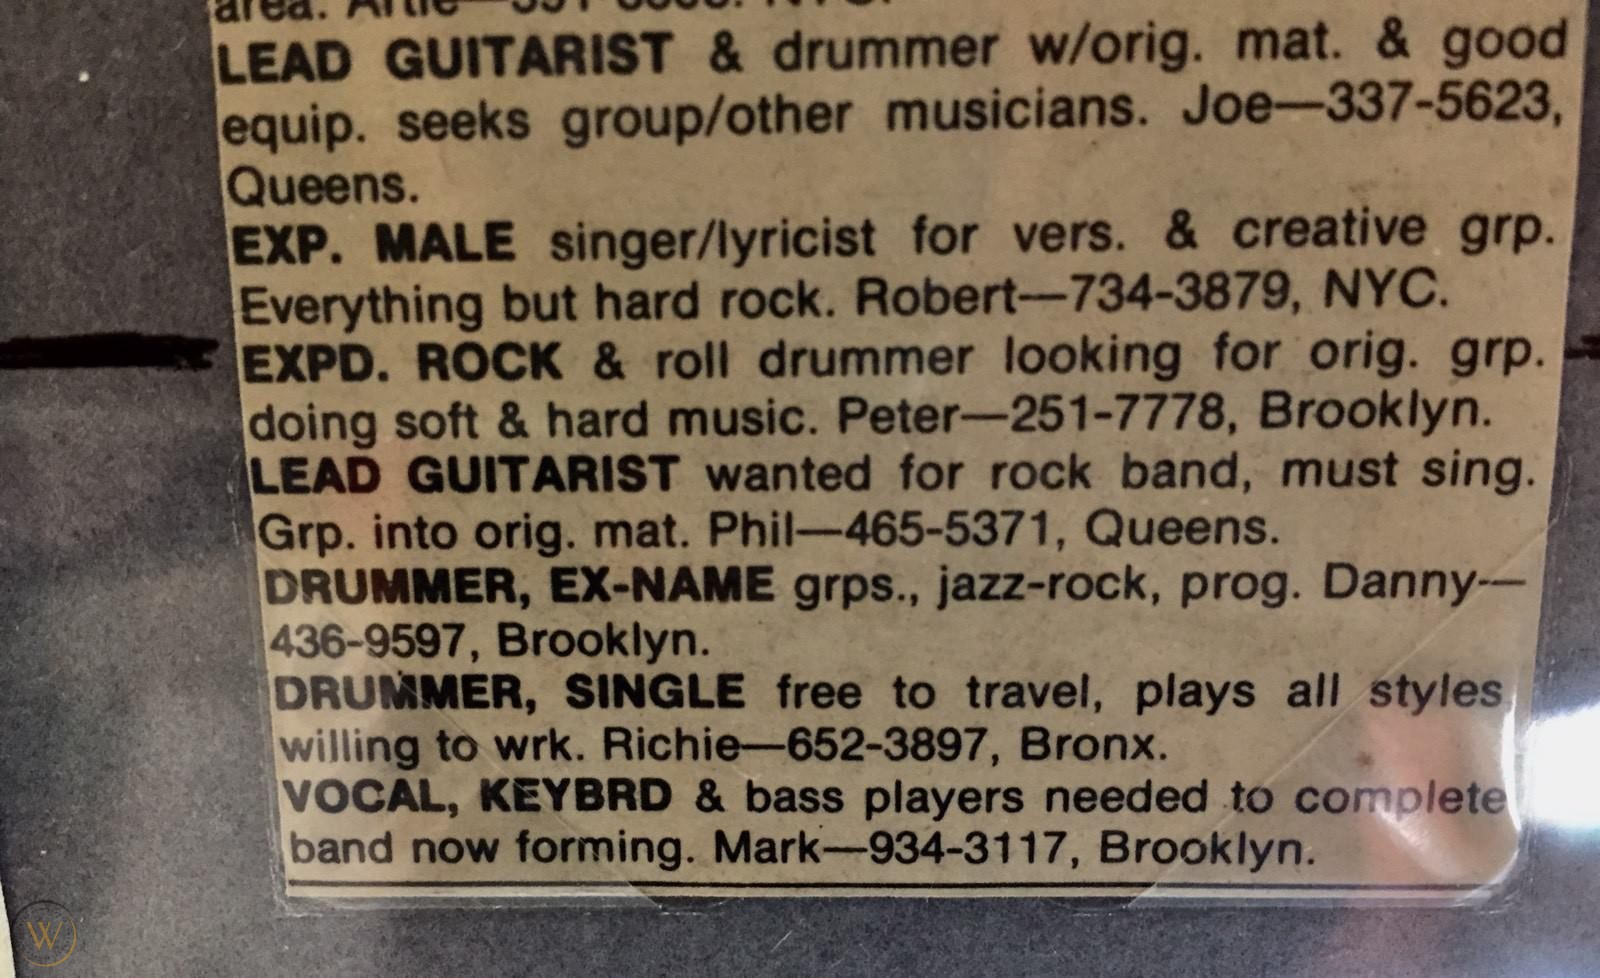 Peter Criss' ad in The Rolling Stone Magazine 1972